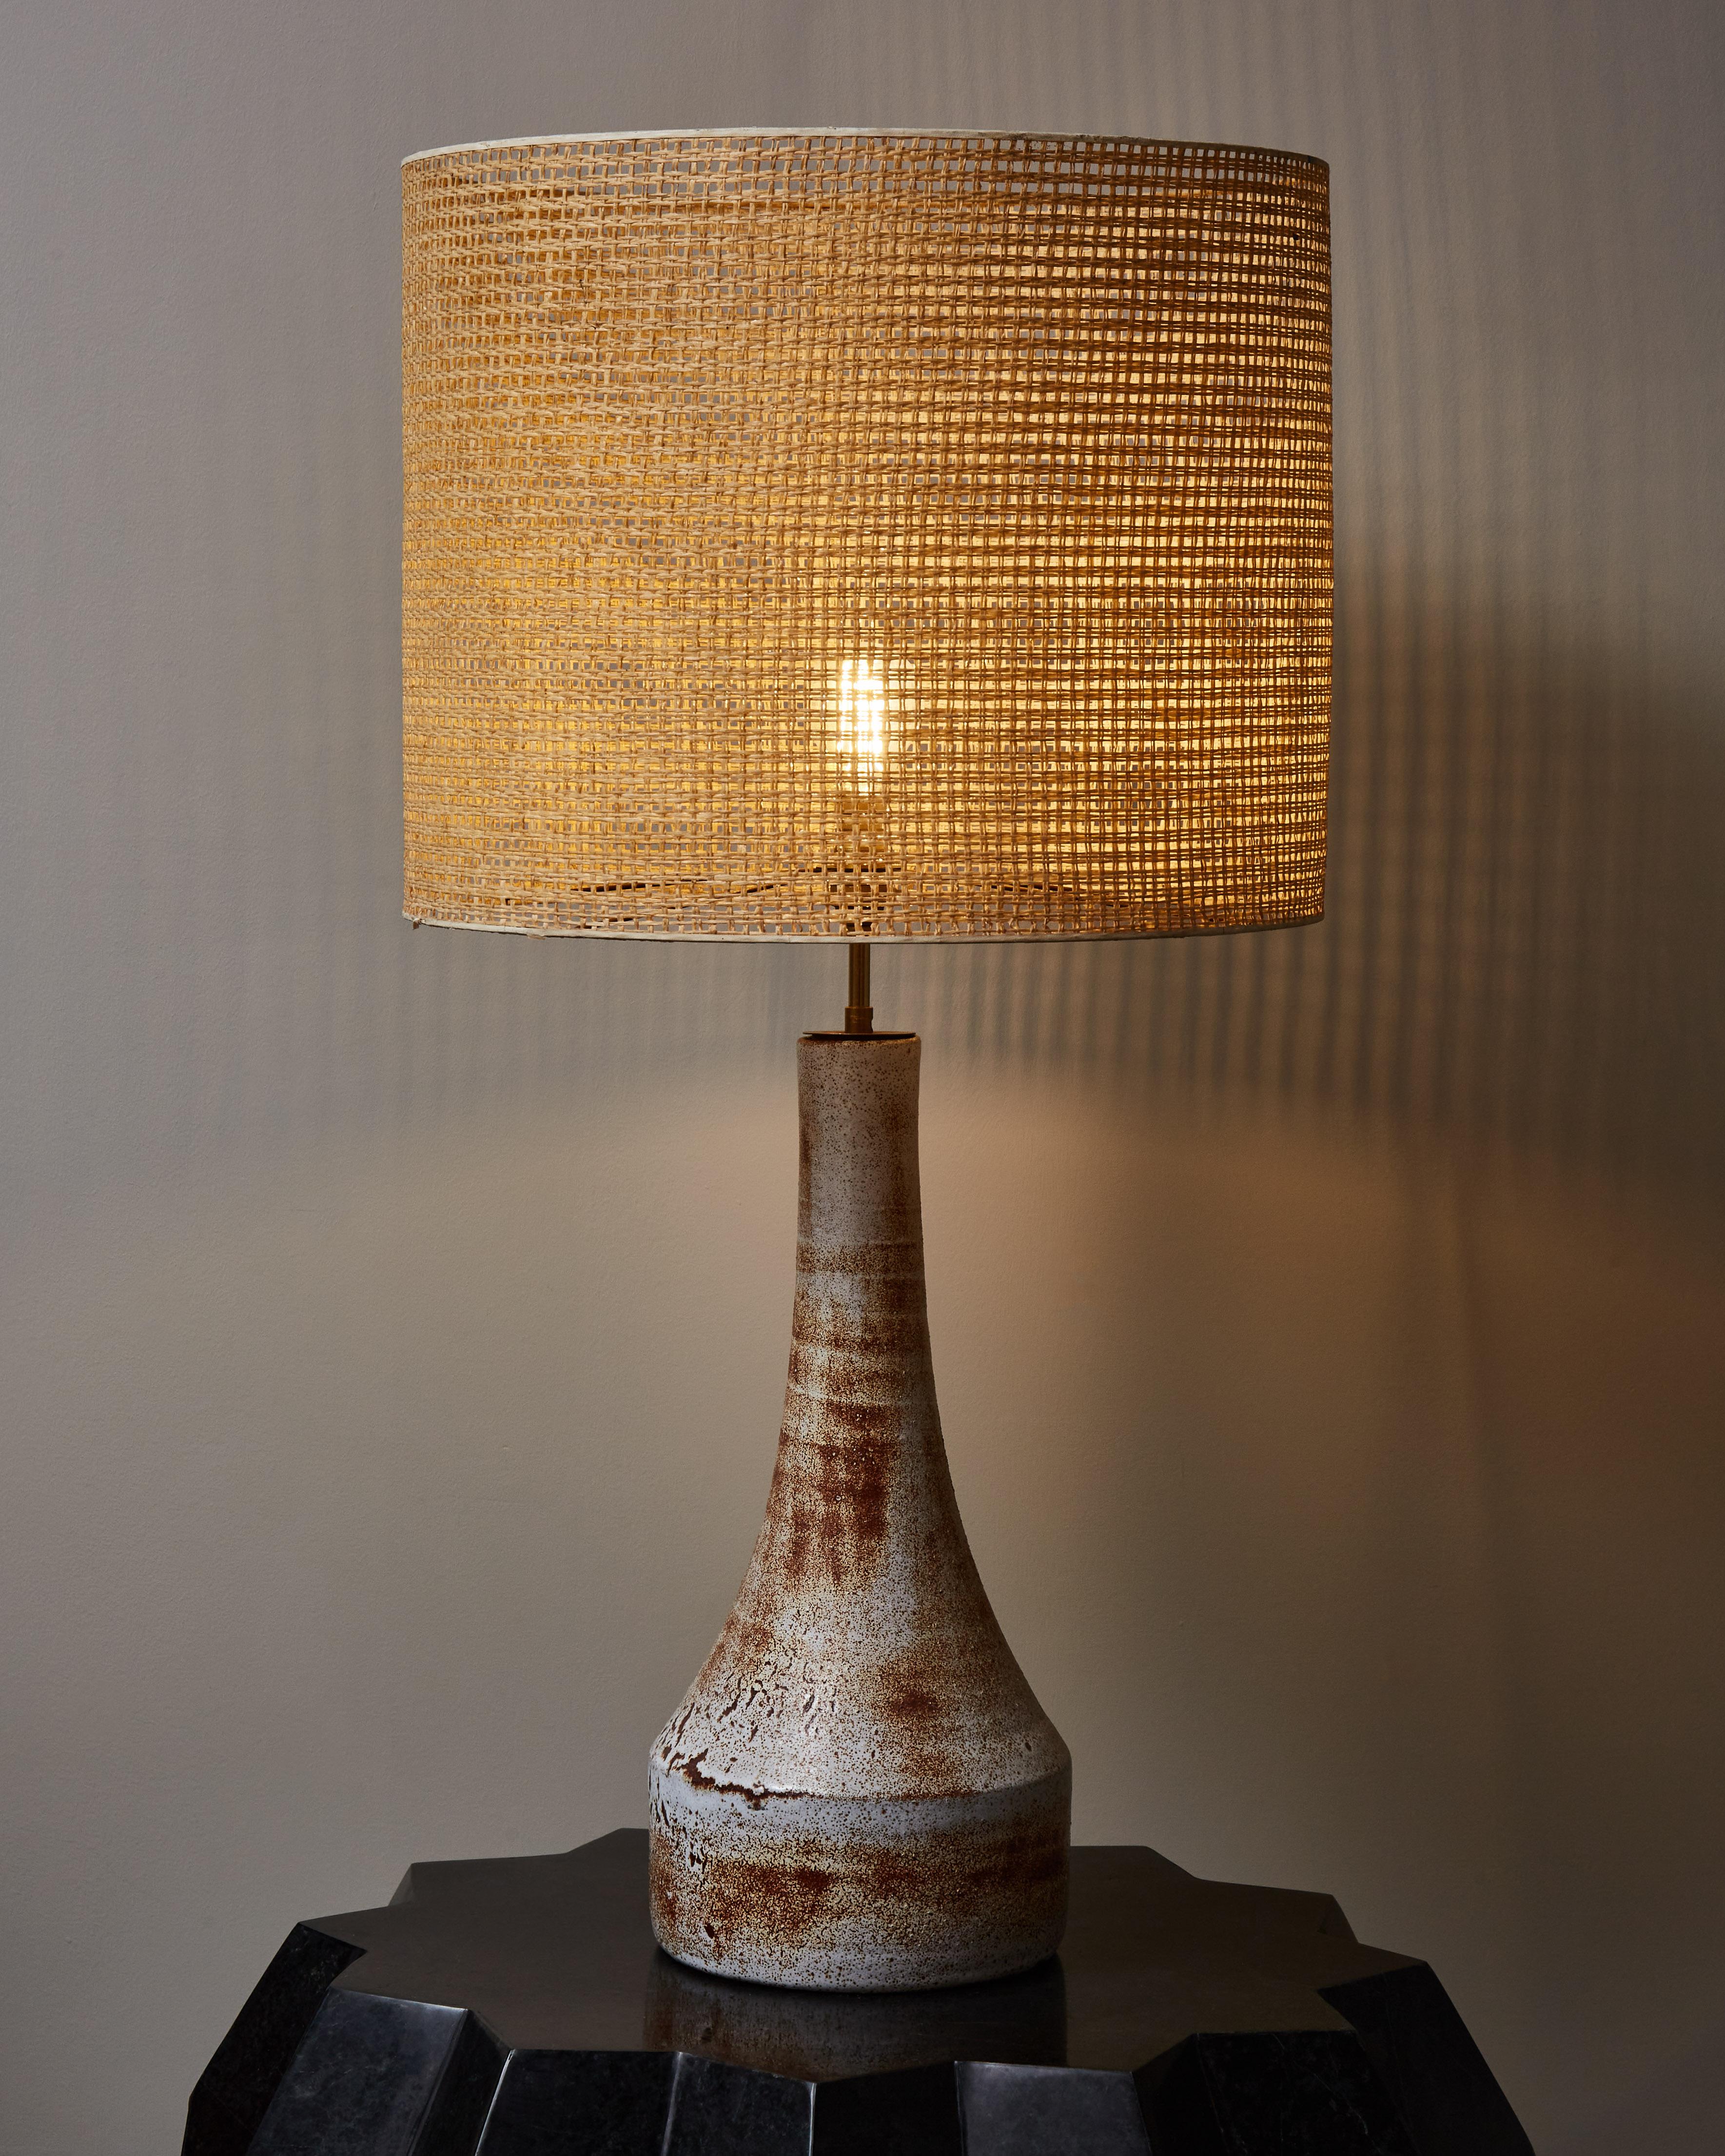 Tall ceramic table lamp funnel shaped glazed in white and brown.
Original shade in wicker.